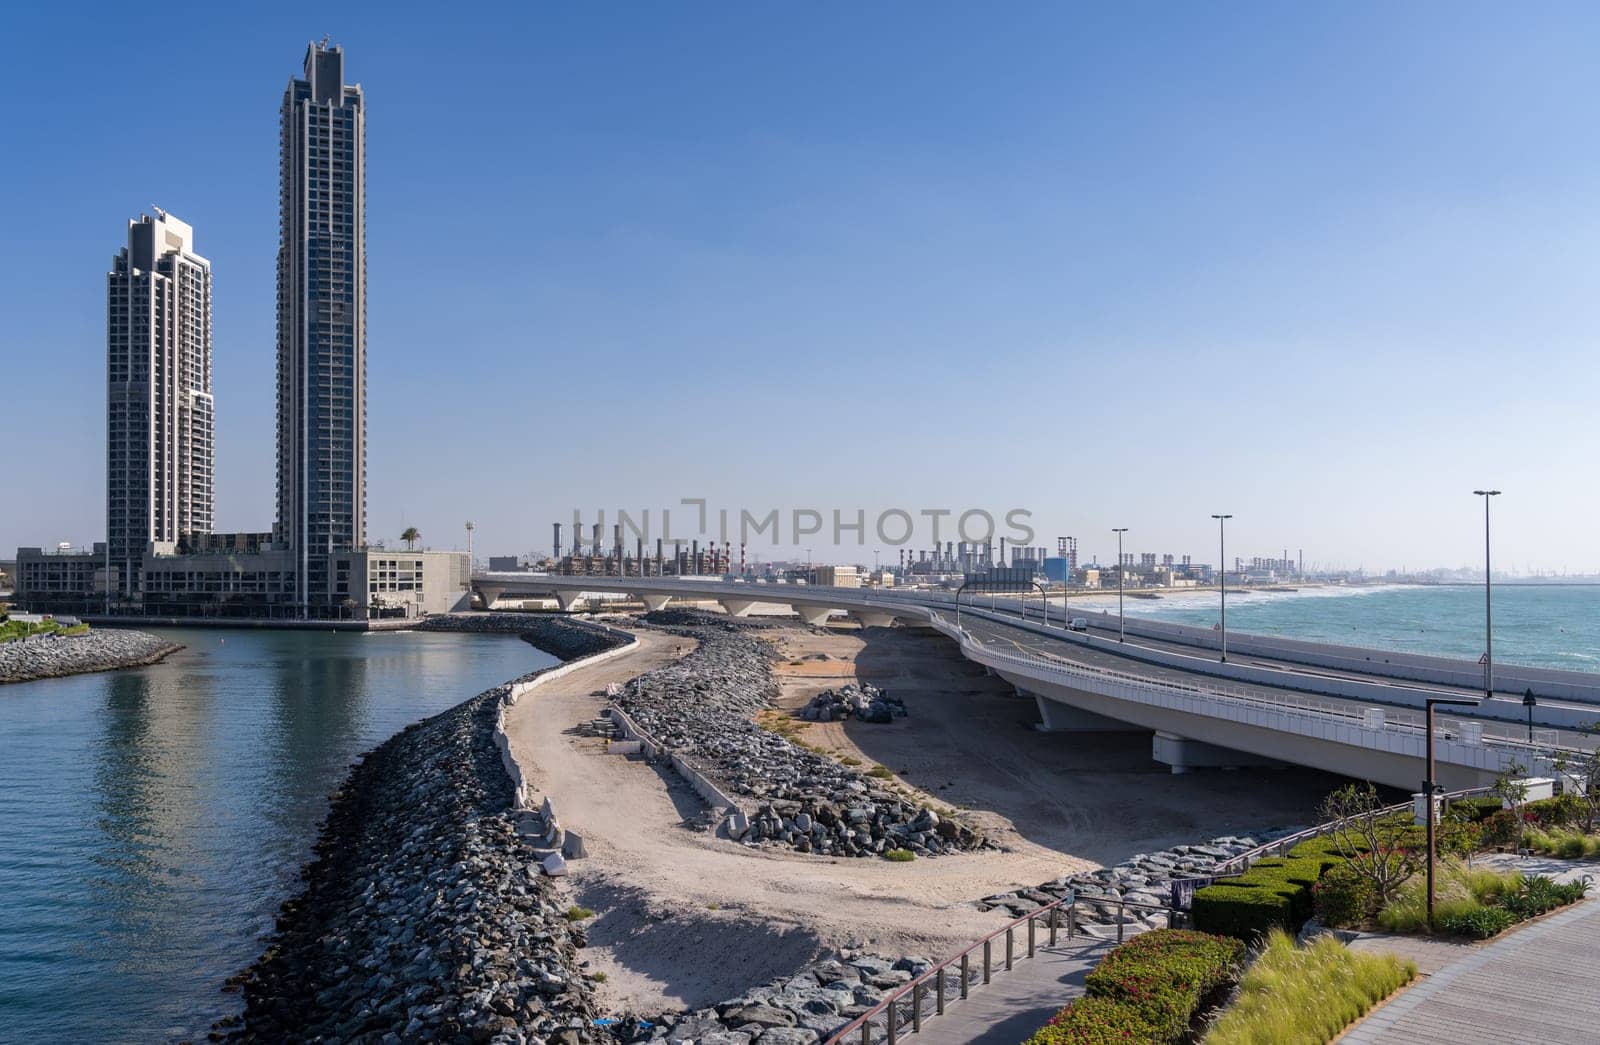 Industrial power station and water treatment plants on the edge of JBR beach in Dubai